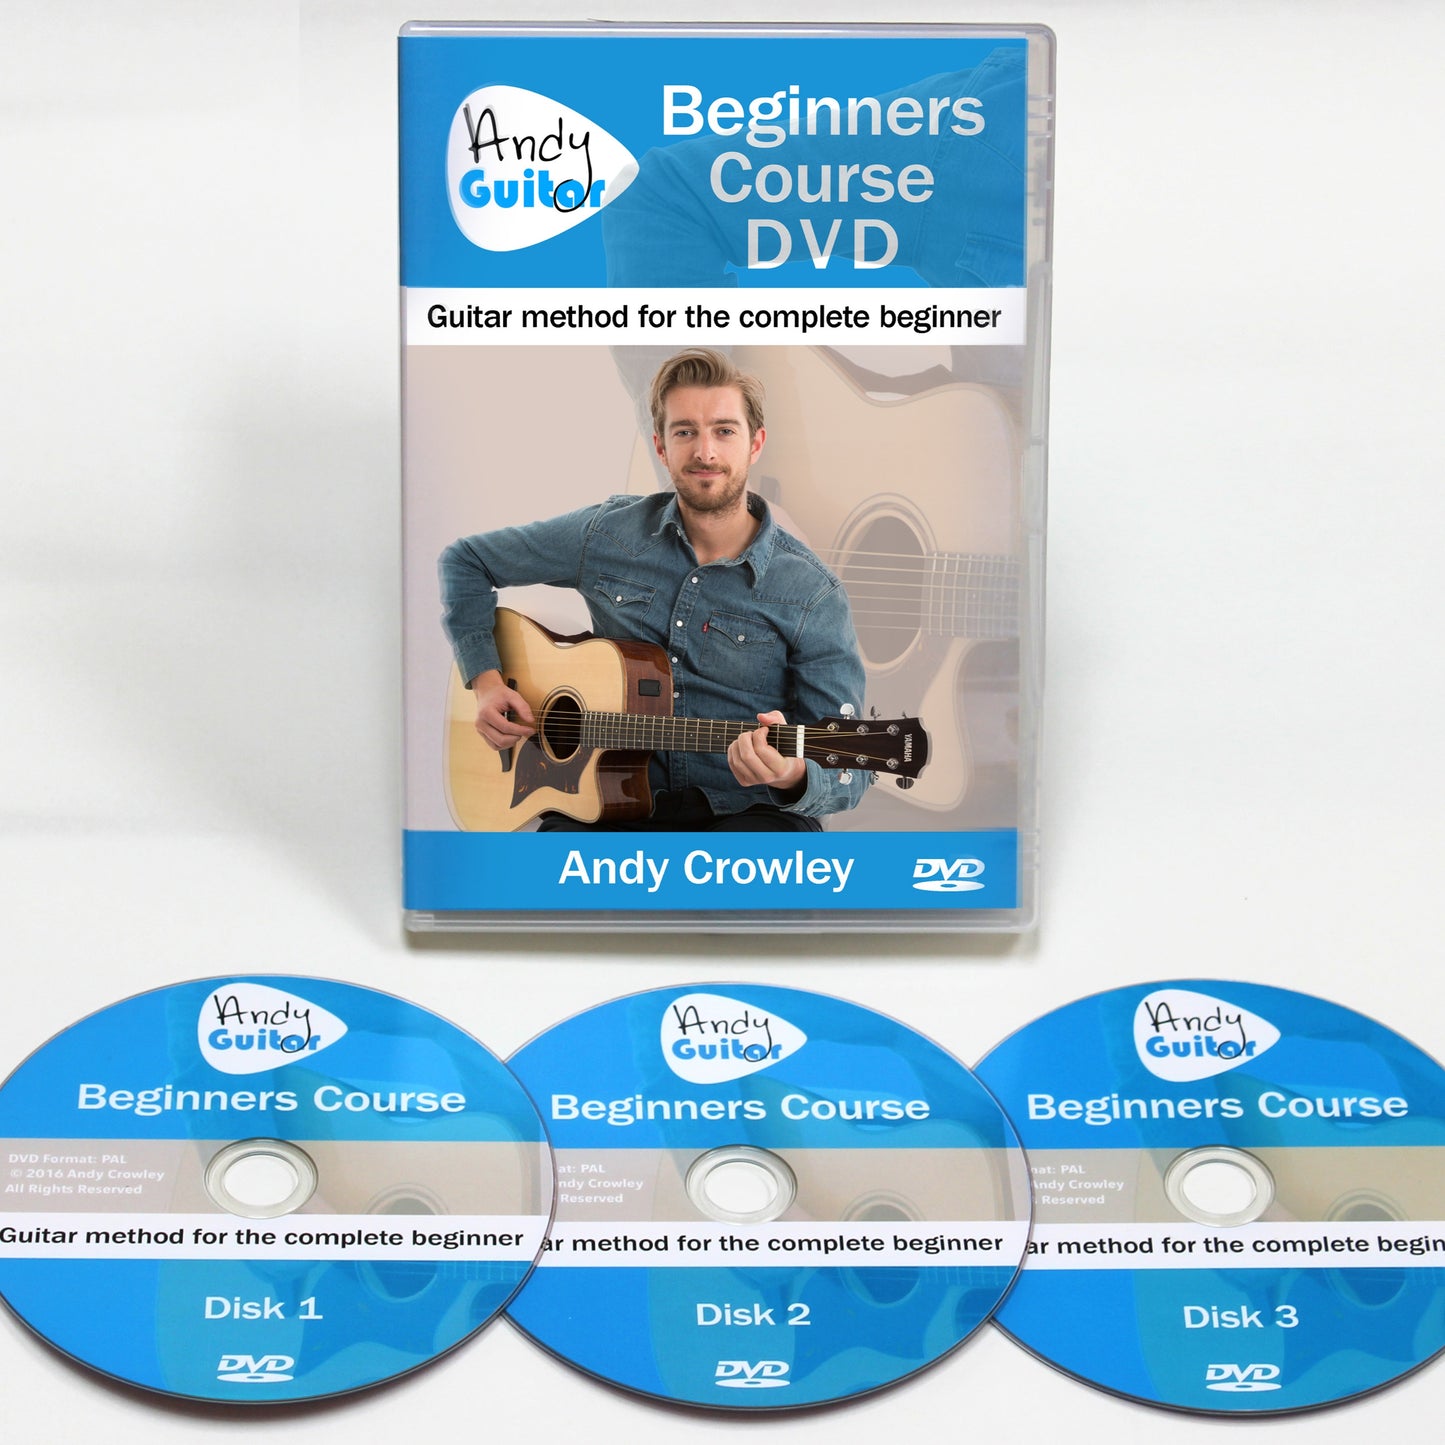 Andy's Beginners Course DVD